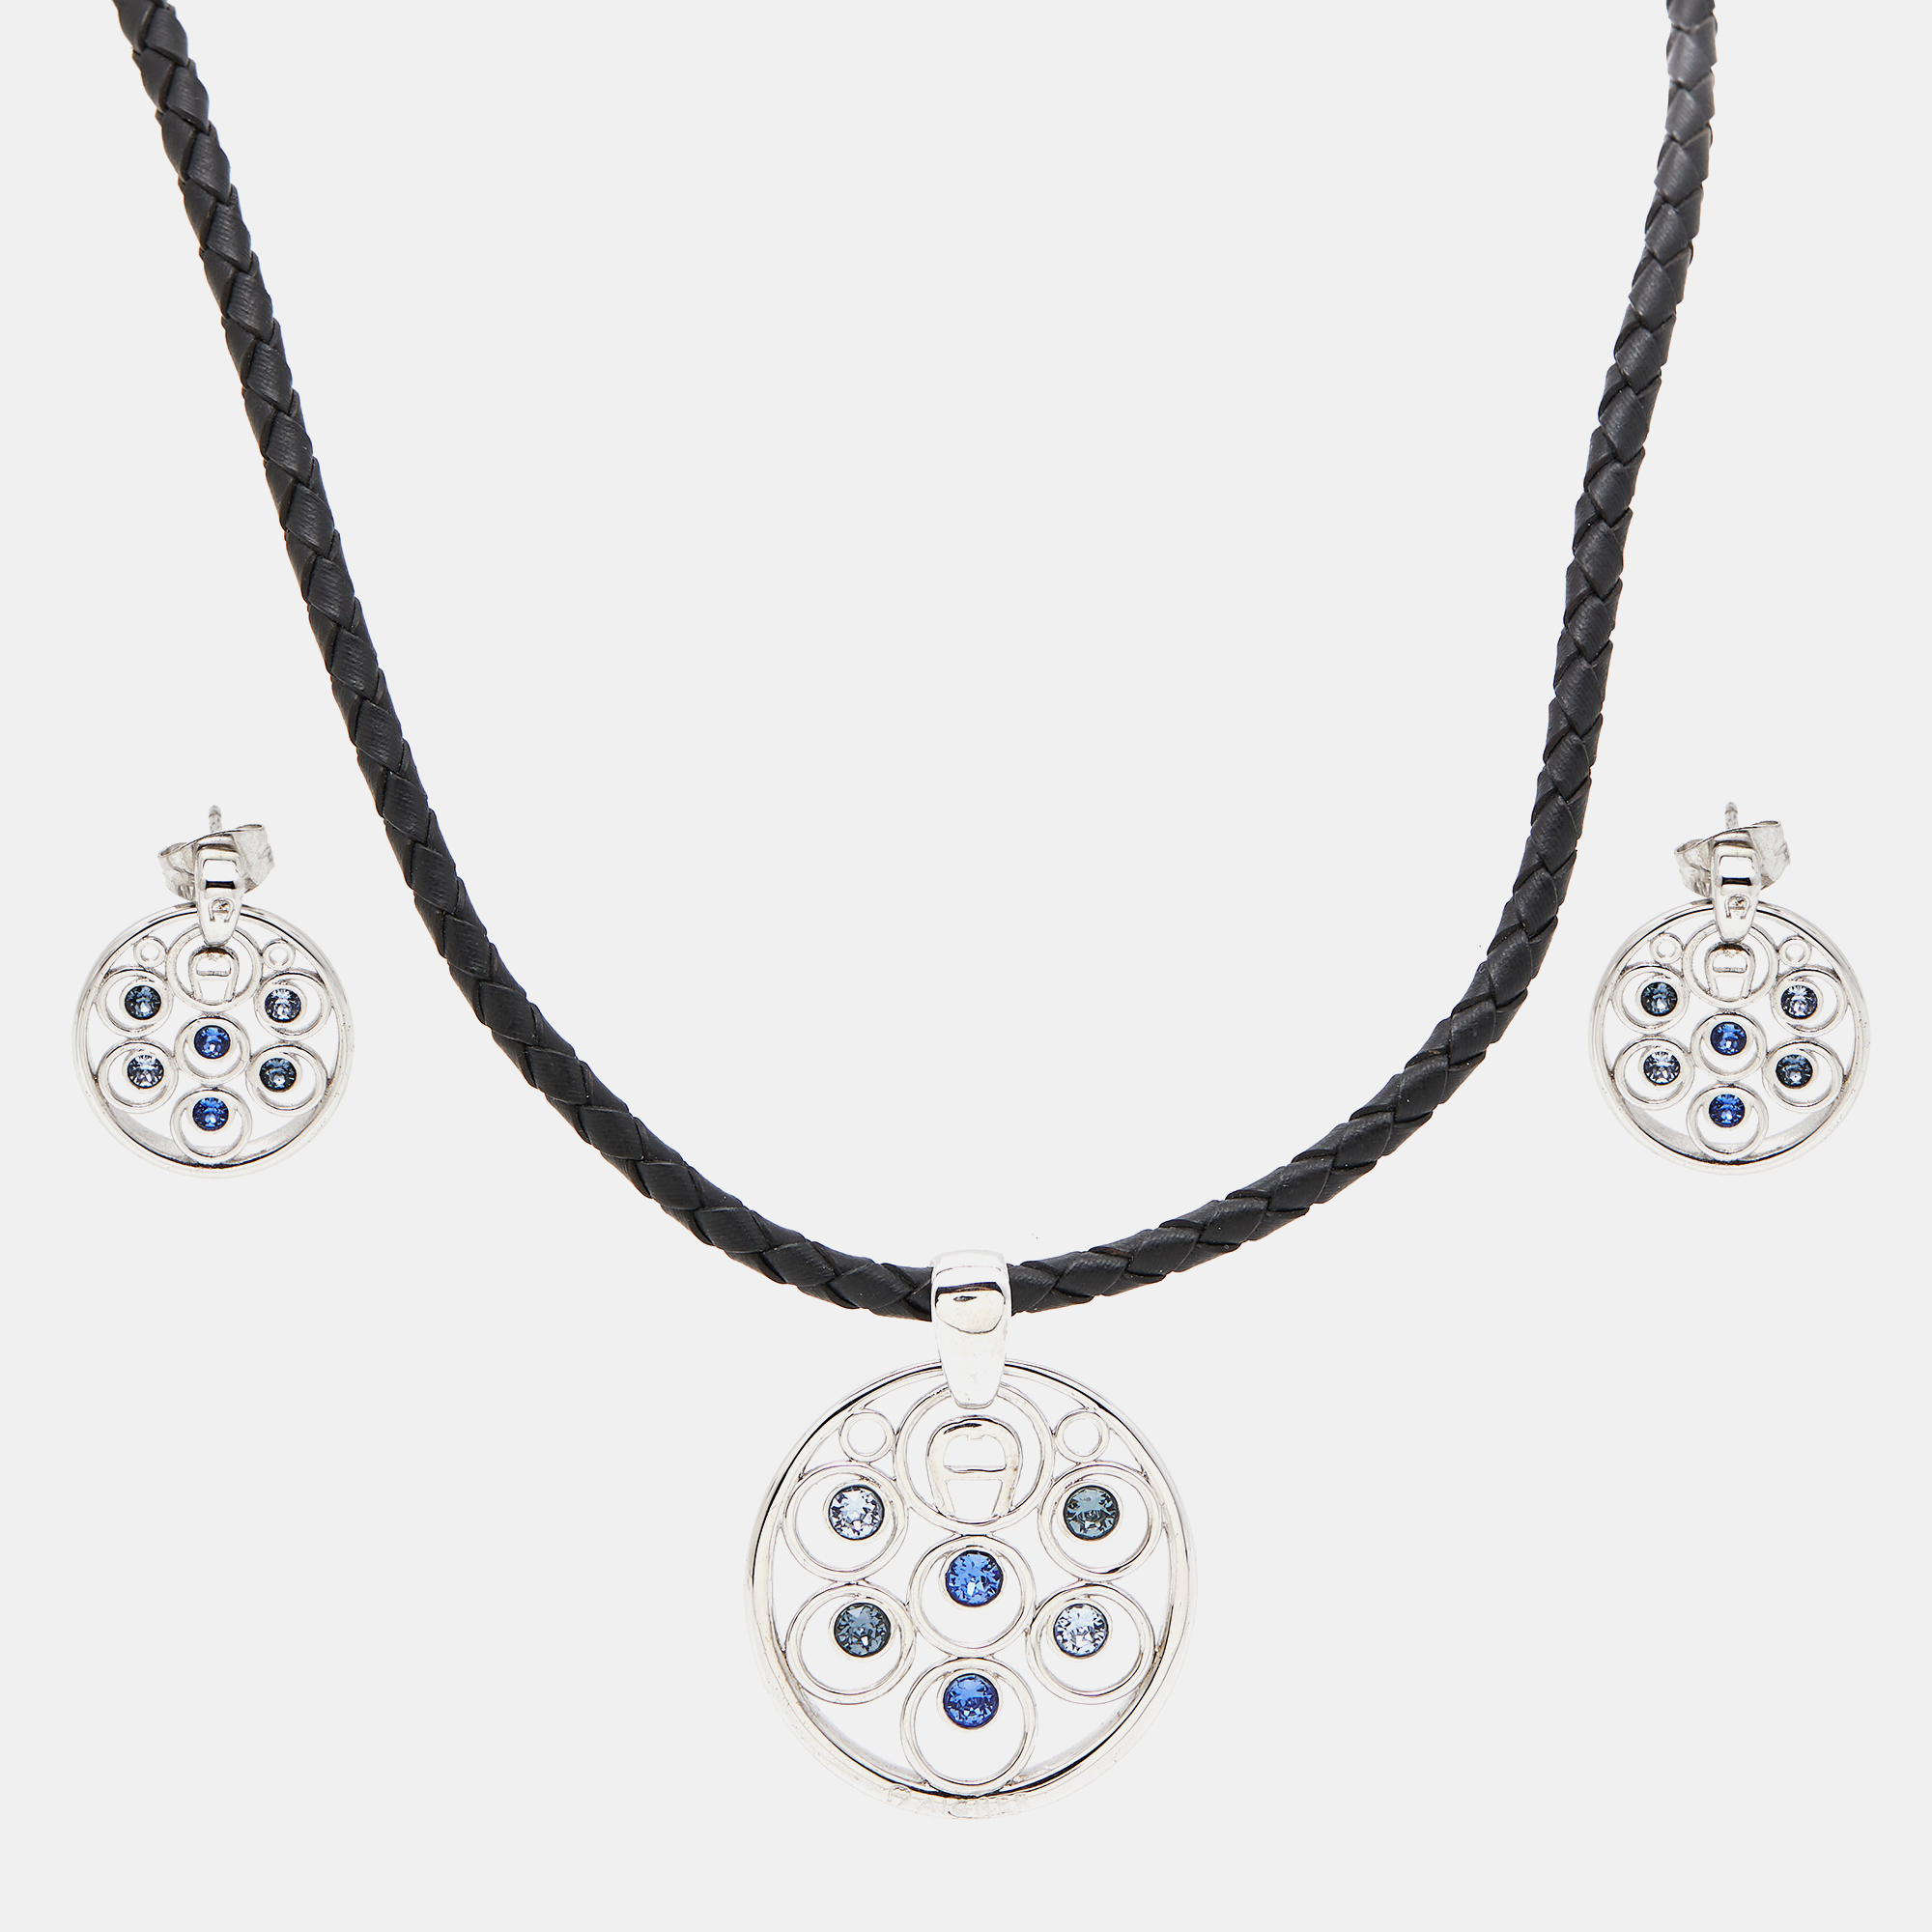 This delicate set from Aigner is made of silver tone metal and adorned with crystals. The necklace and earrings feature a lovely design added with the brand logo.